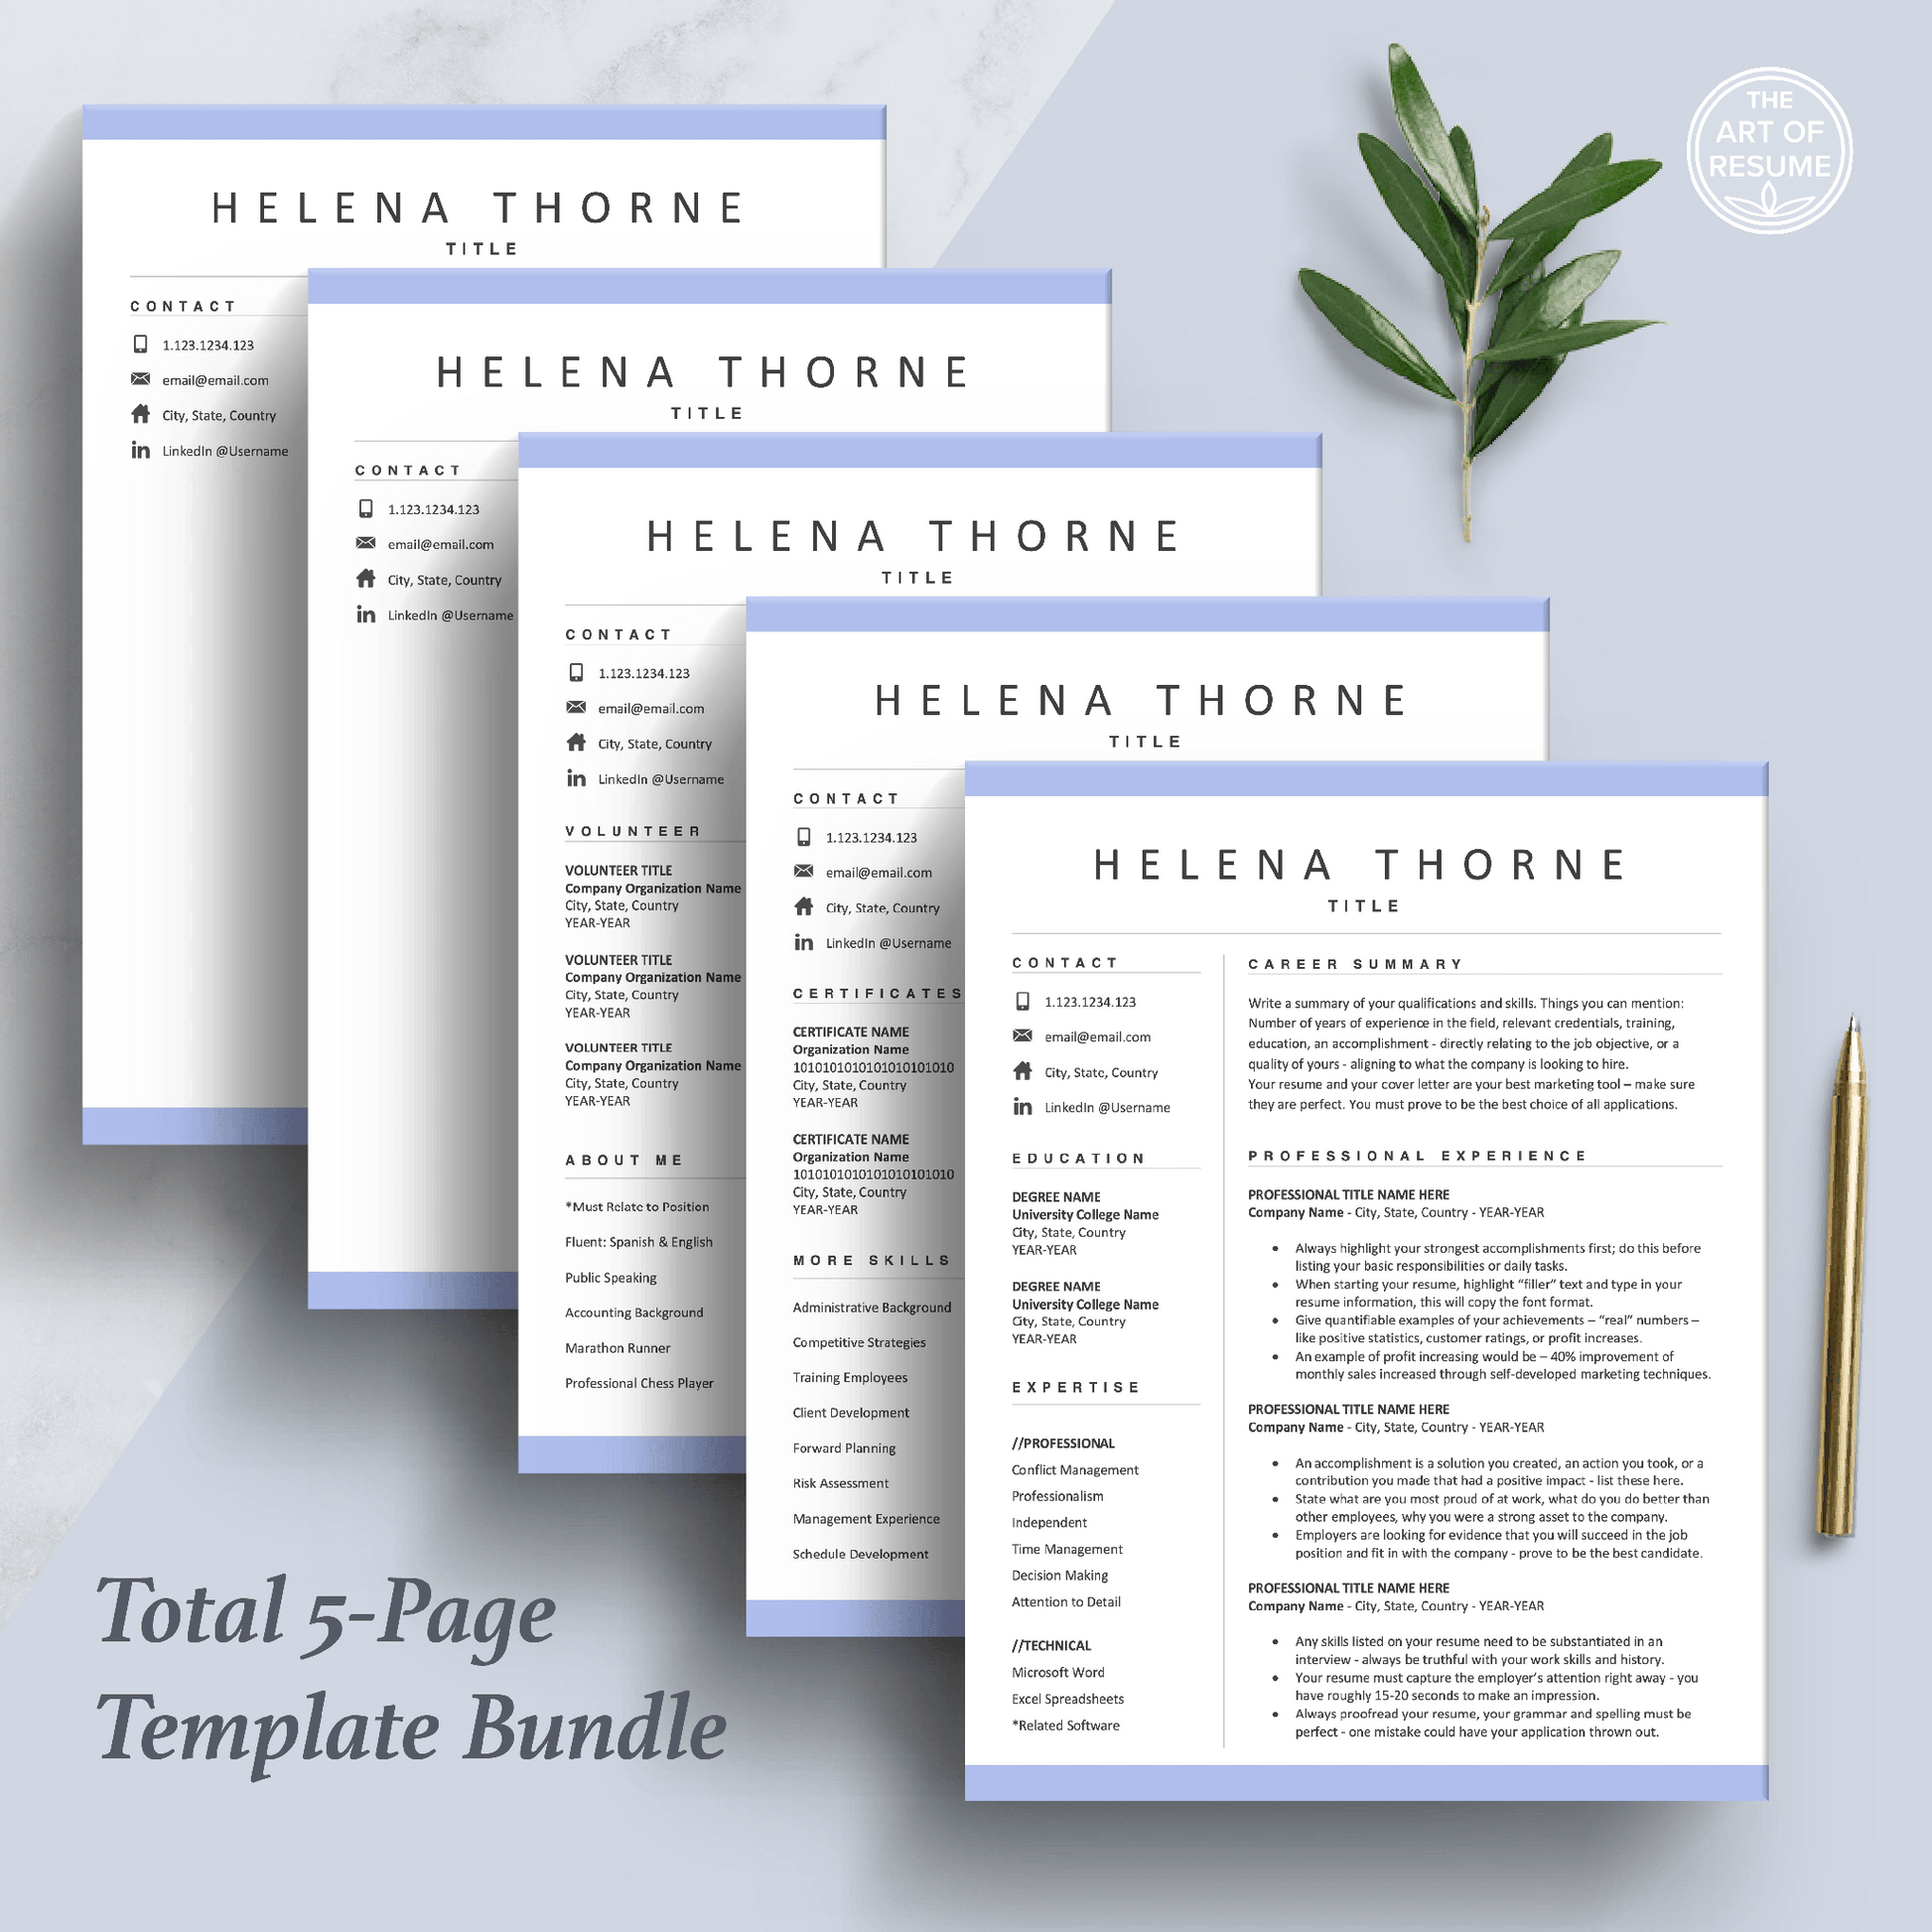 The Art of Resume Templates | Professional Resume CV Design Bundle including matching cover letter and reference page